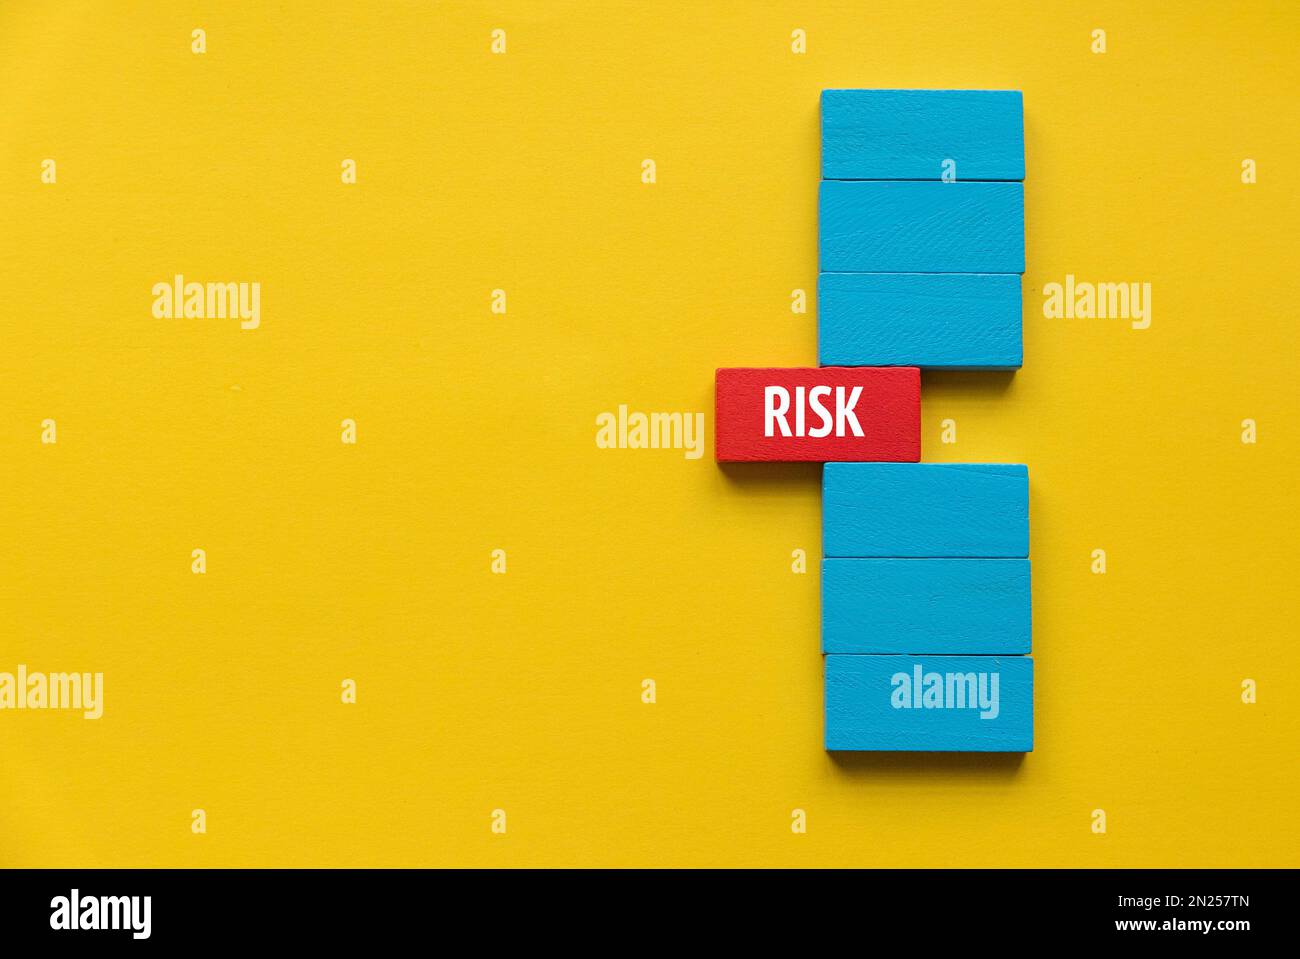 Risk concept. A stack of wooden block with a red wooden block come out in the middle. Stock Photo